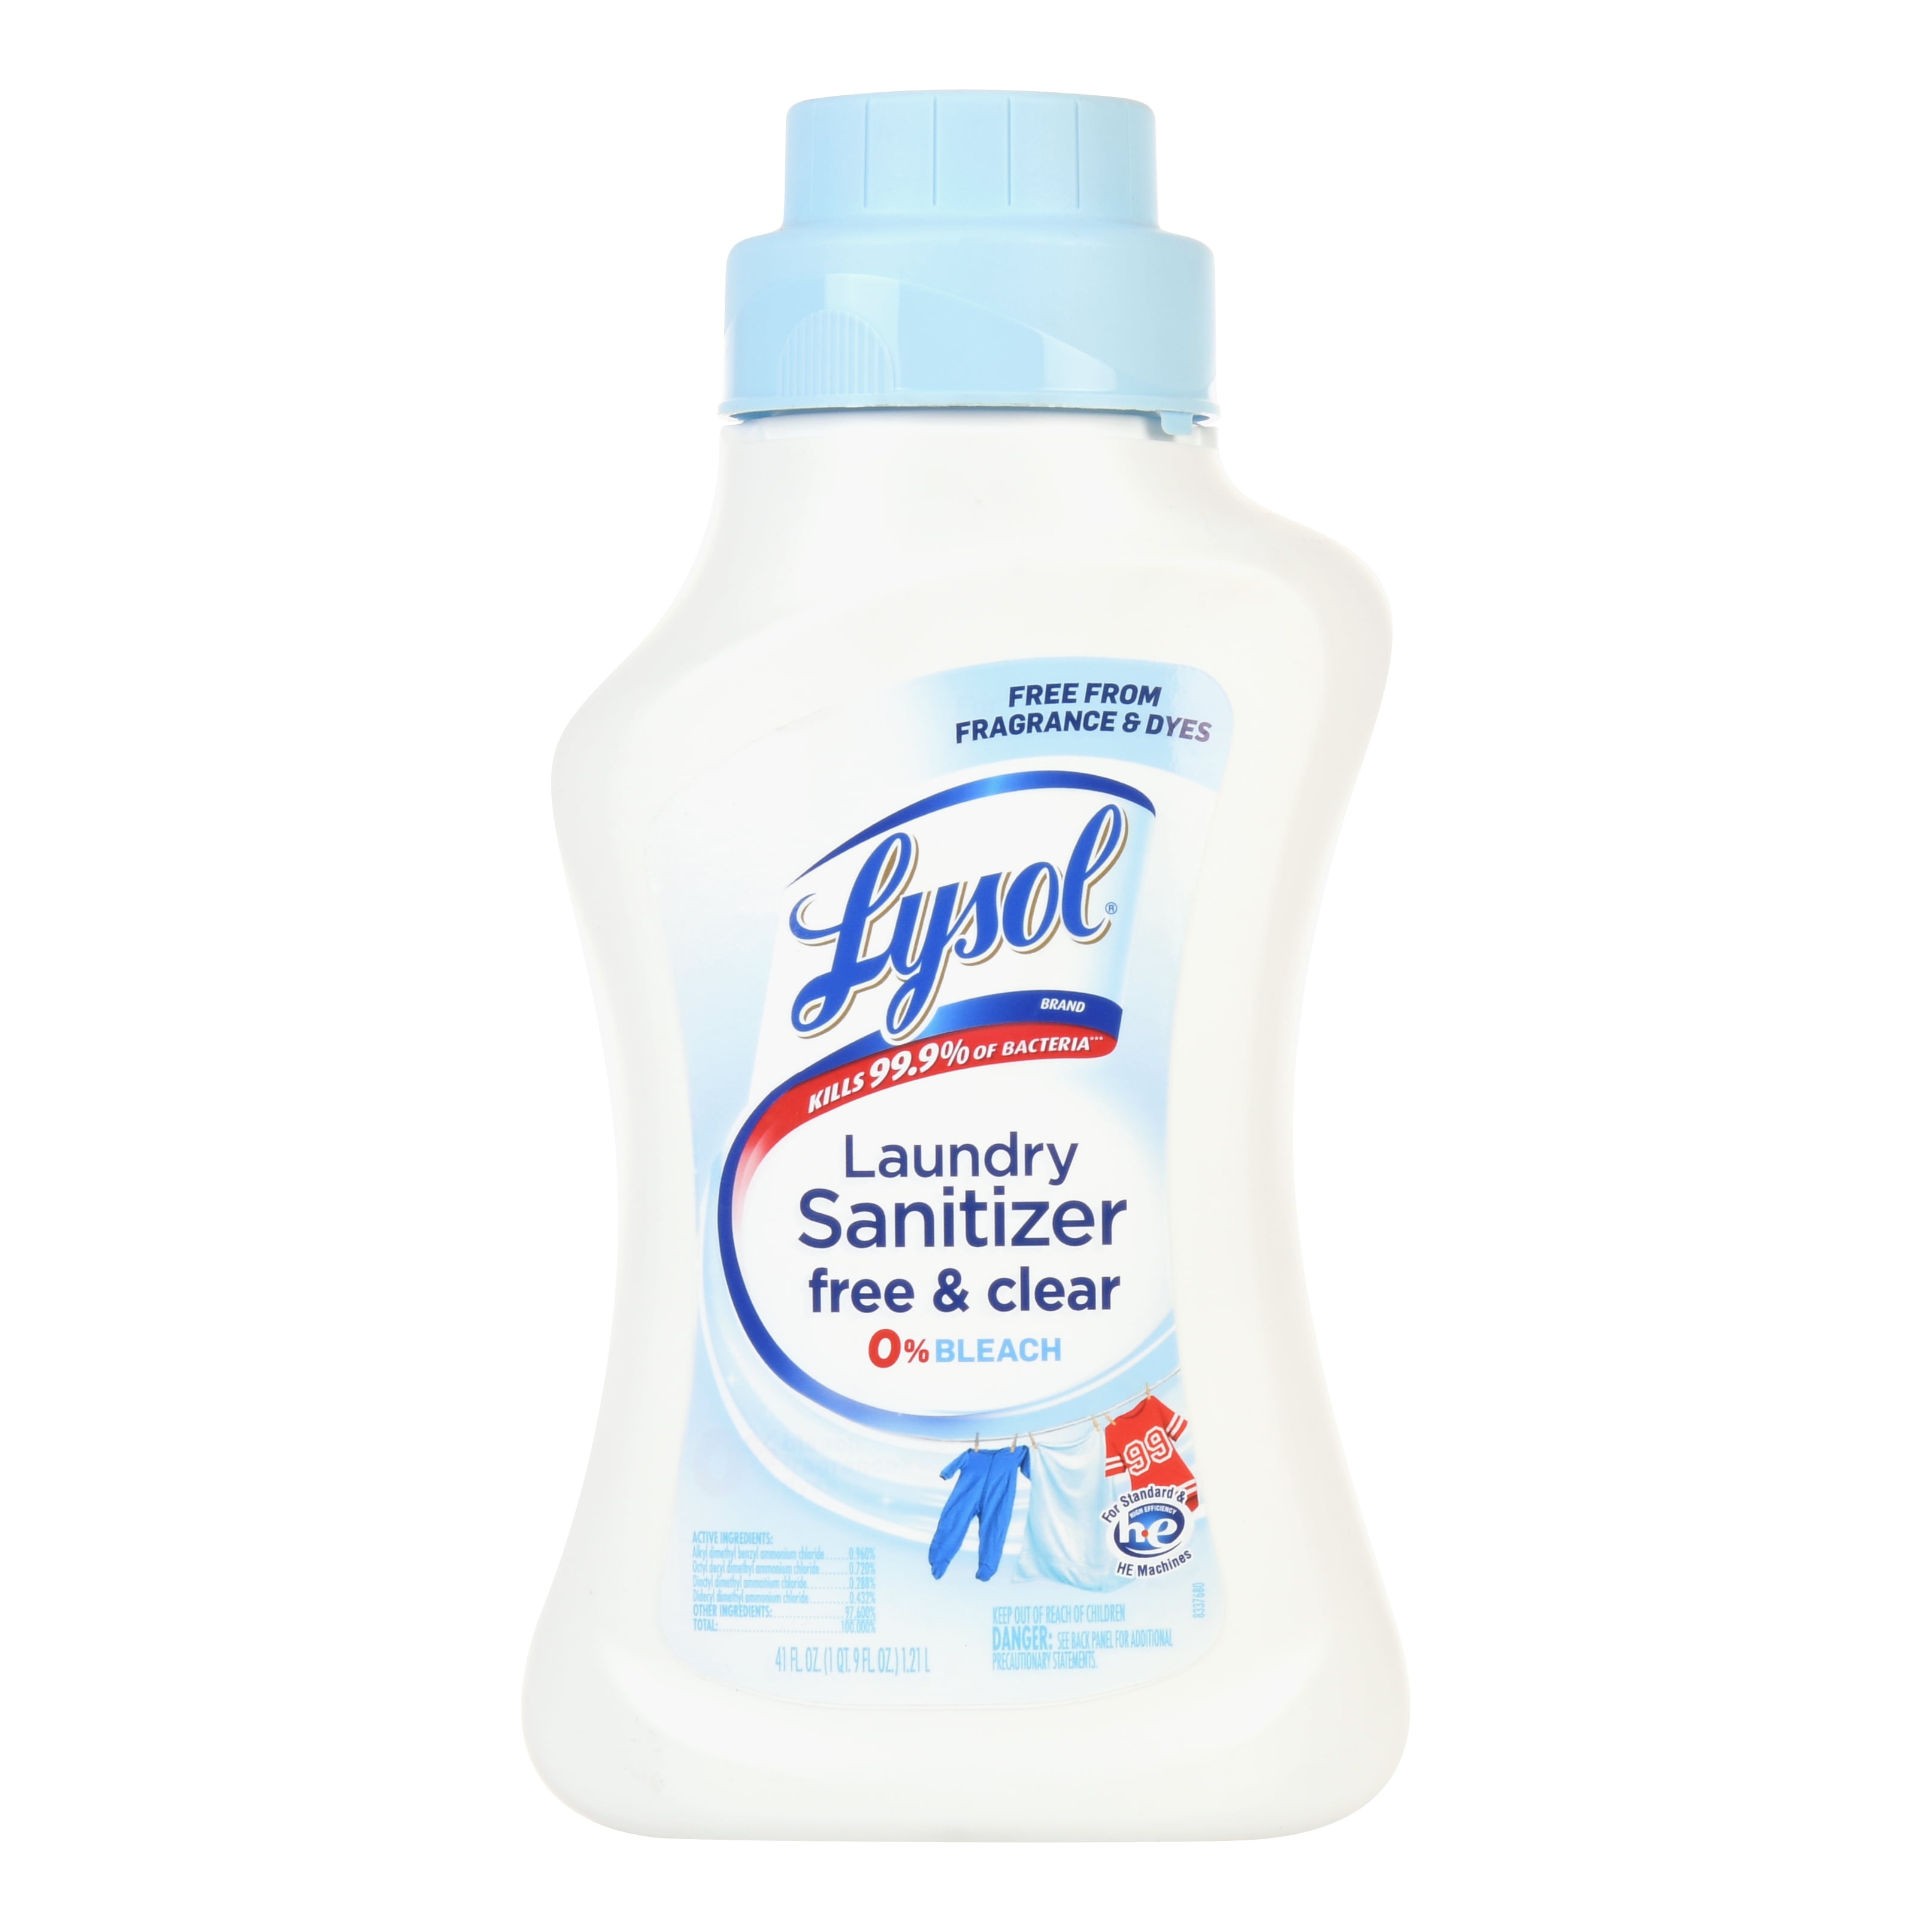 lysol-laundry-sanitizer-free-clear-41-oz-eliminates-odors-and